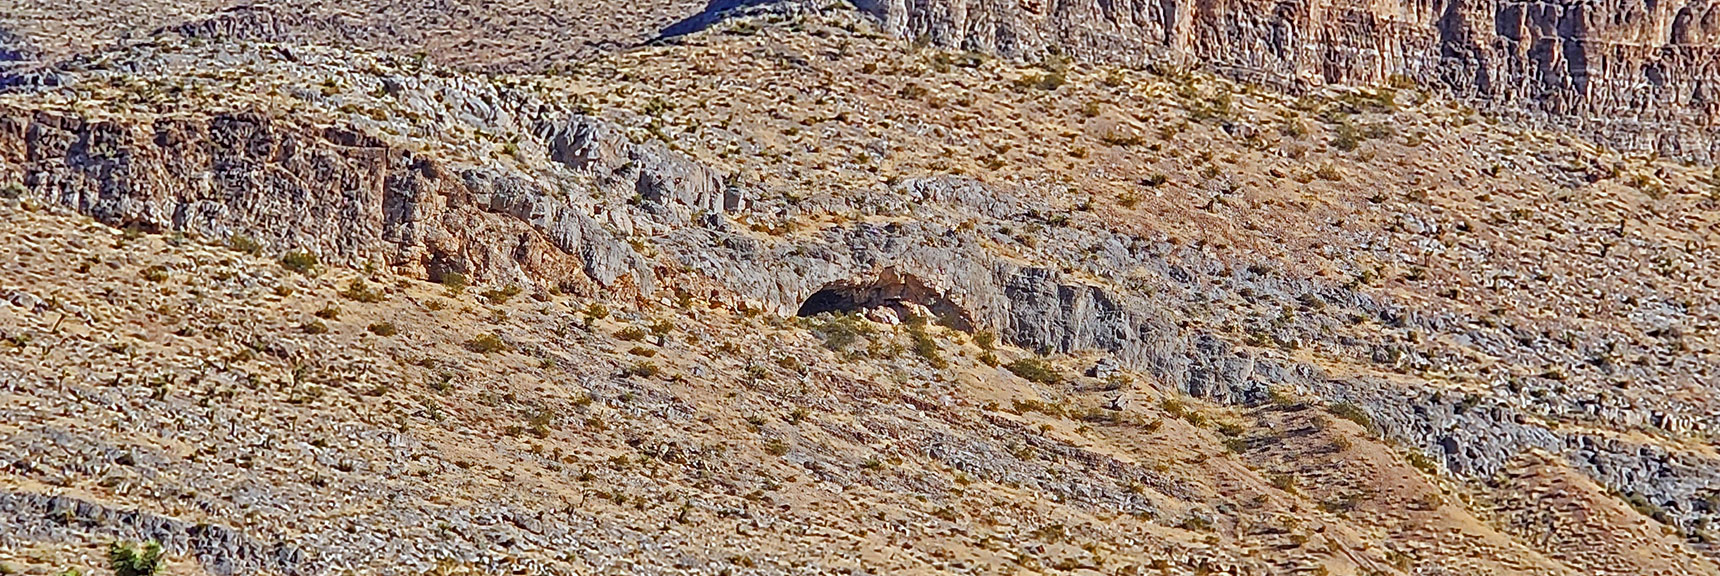 Large Cave on North Wall of Cave Canyon | Landmark Bluff Summit | Lovell Canyon, Nevada